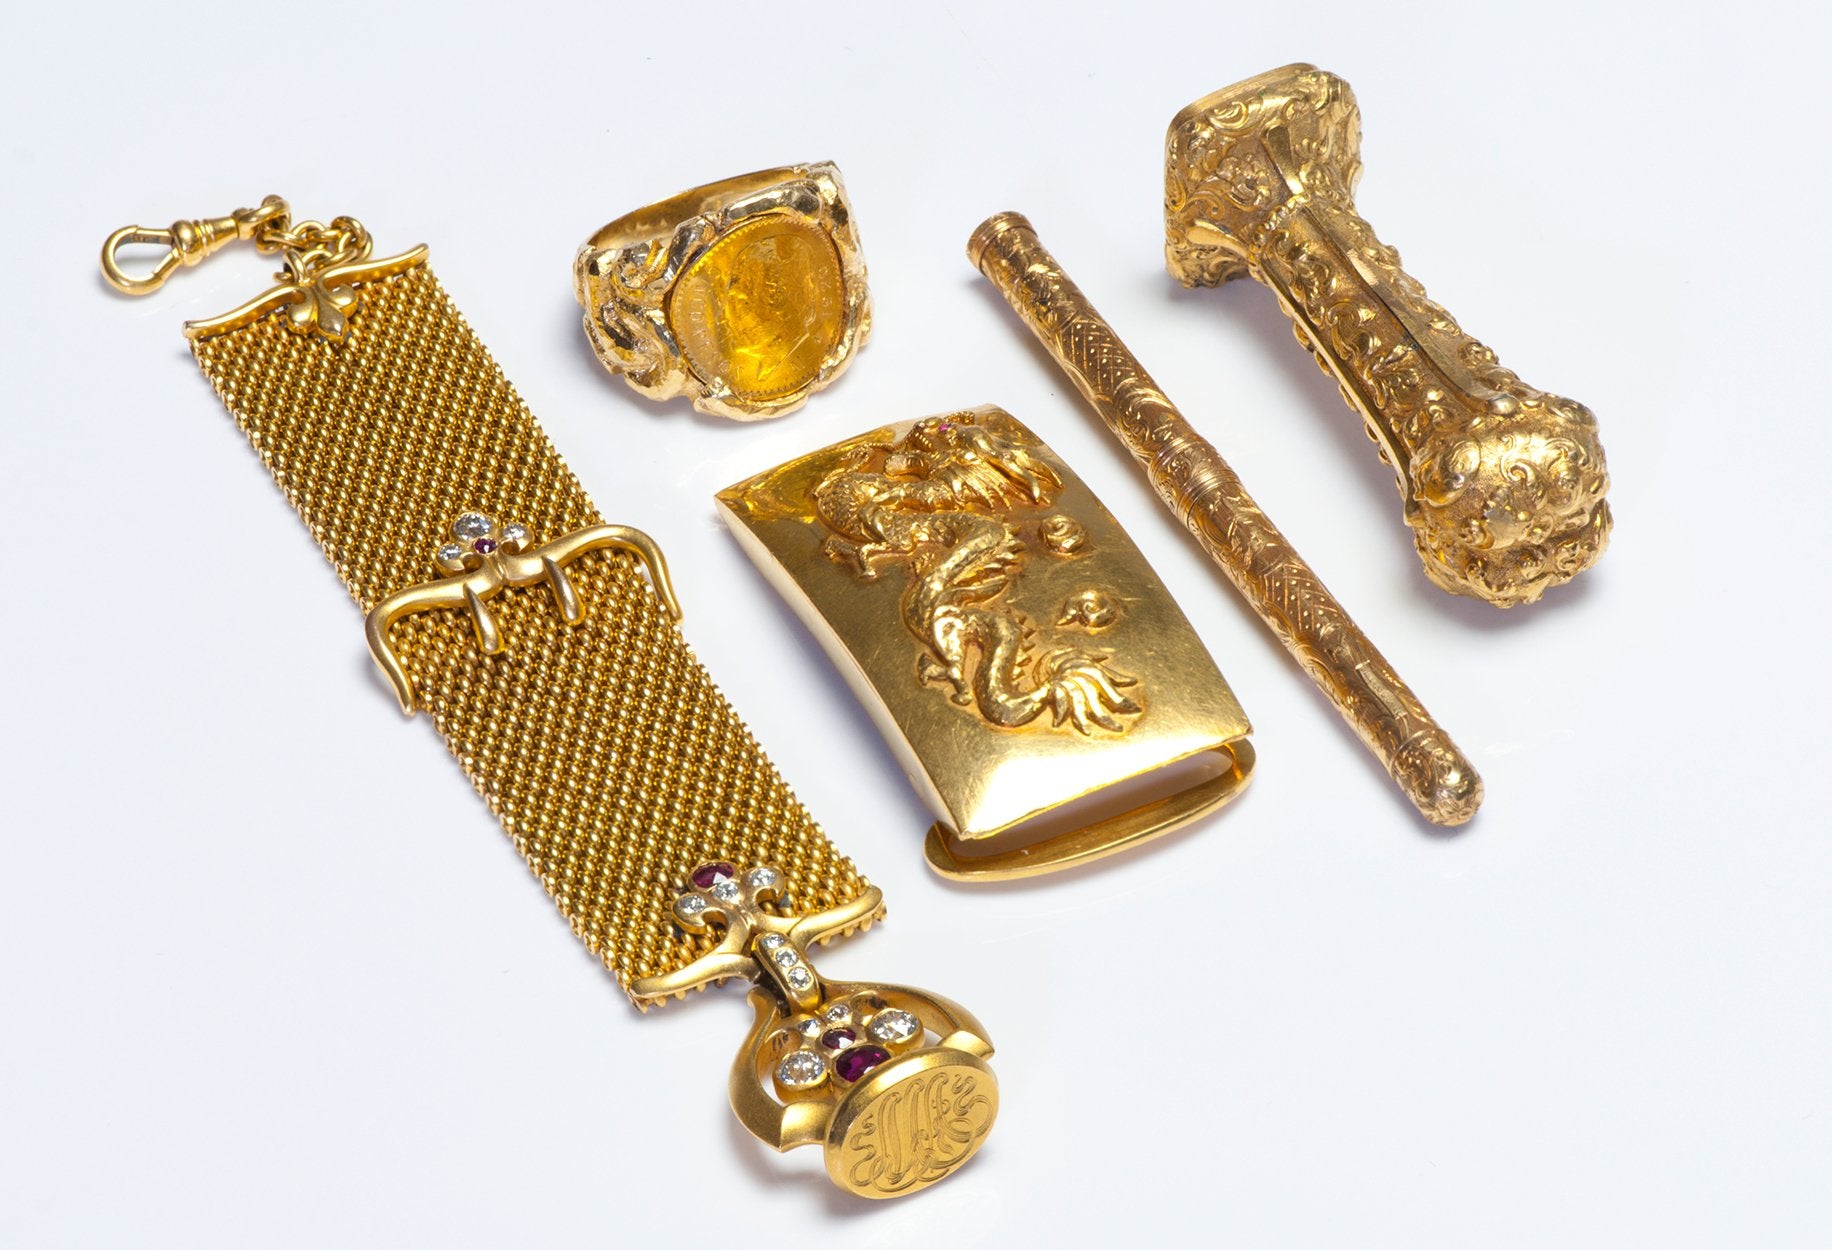 Generation Z And Millennials Are Starting To Invest in Gold - DSF Antique Jewelry